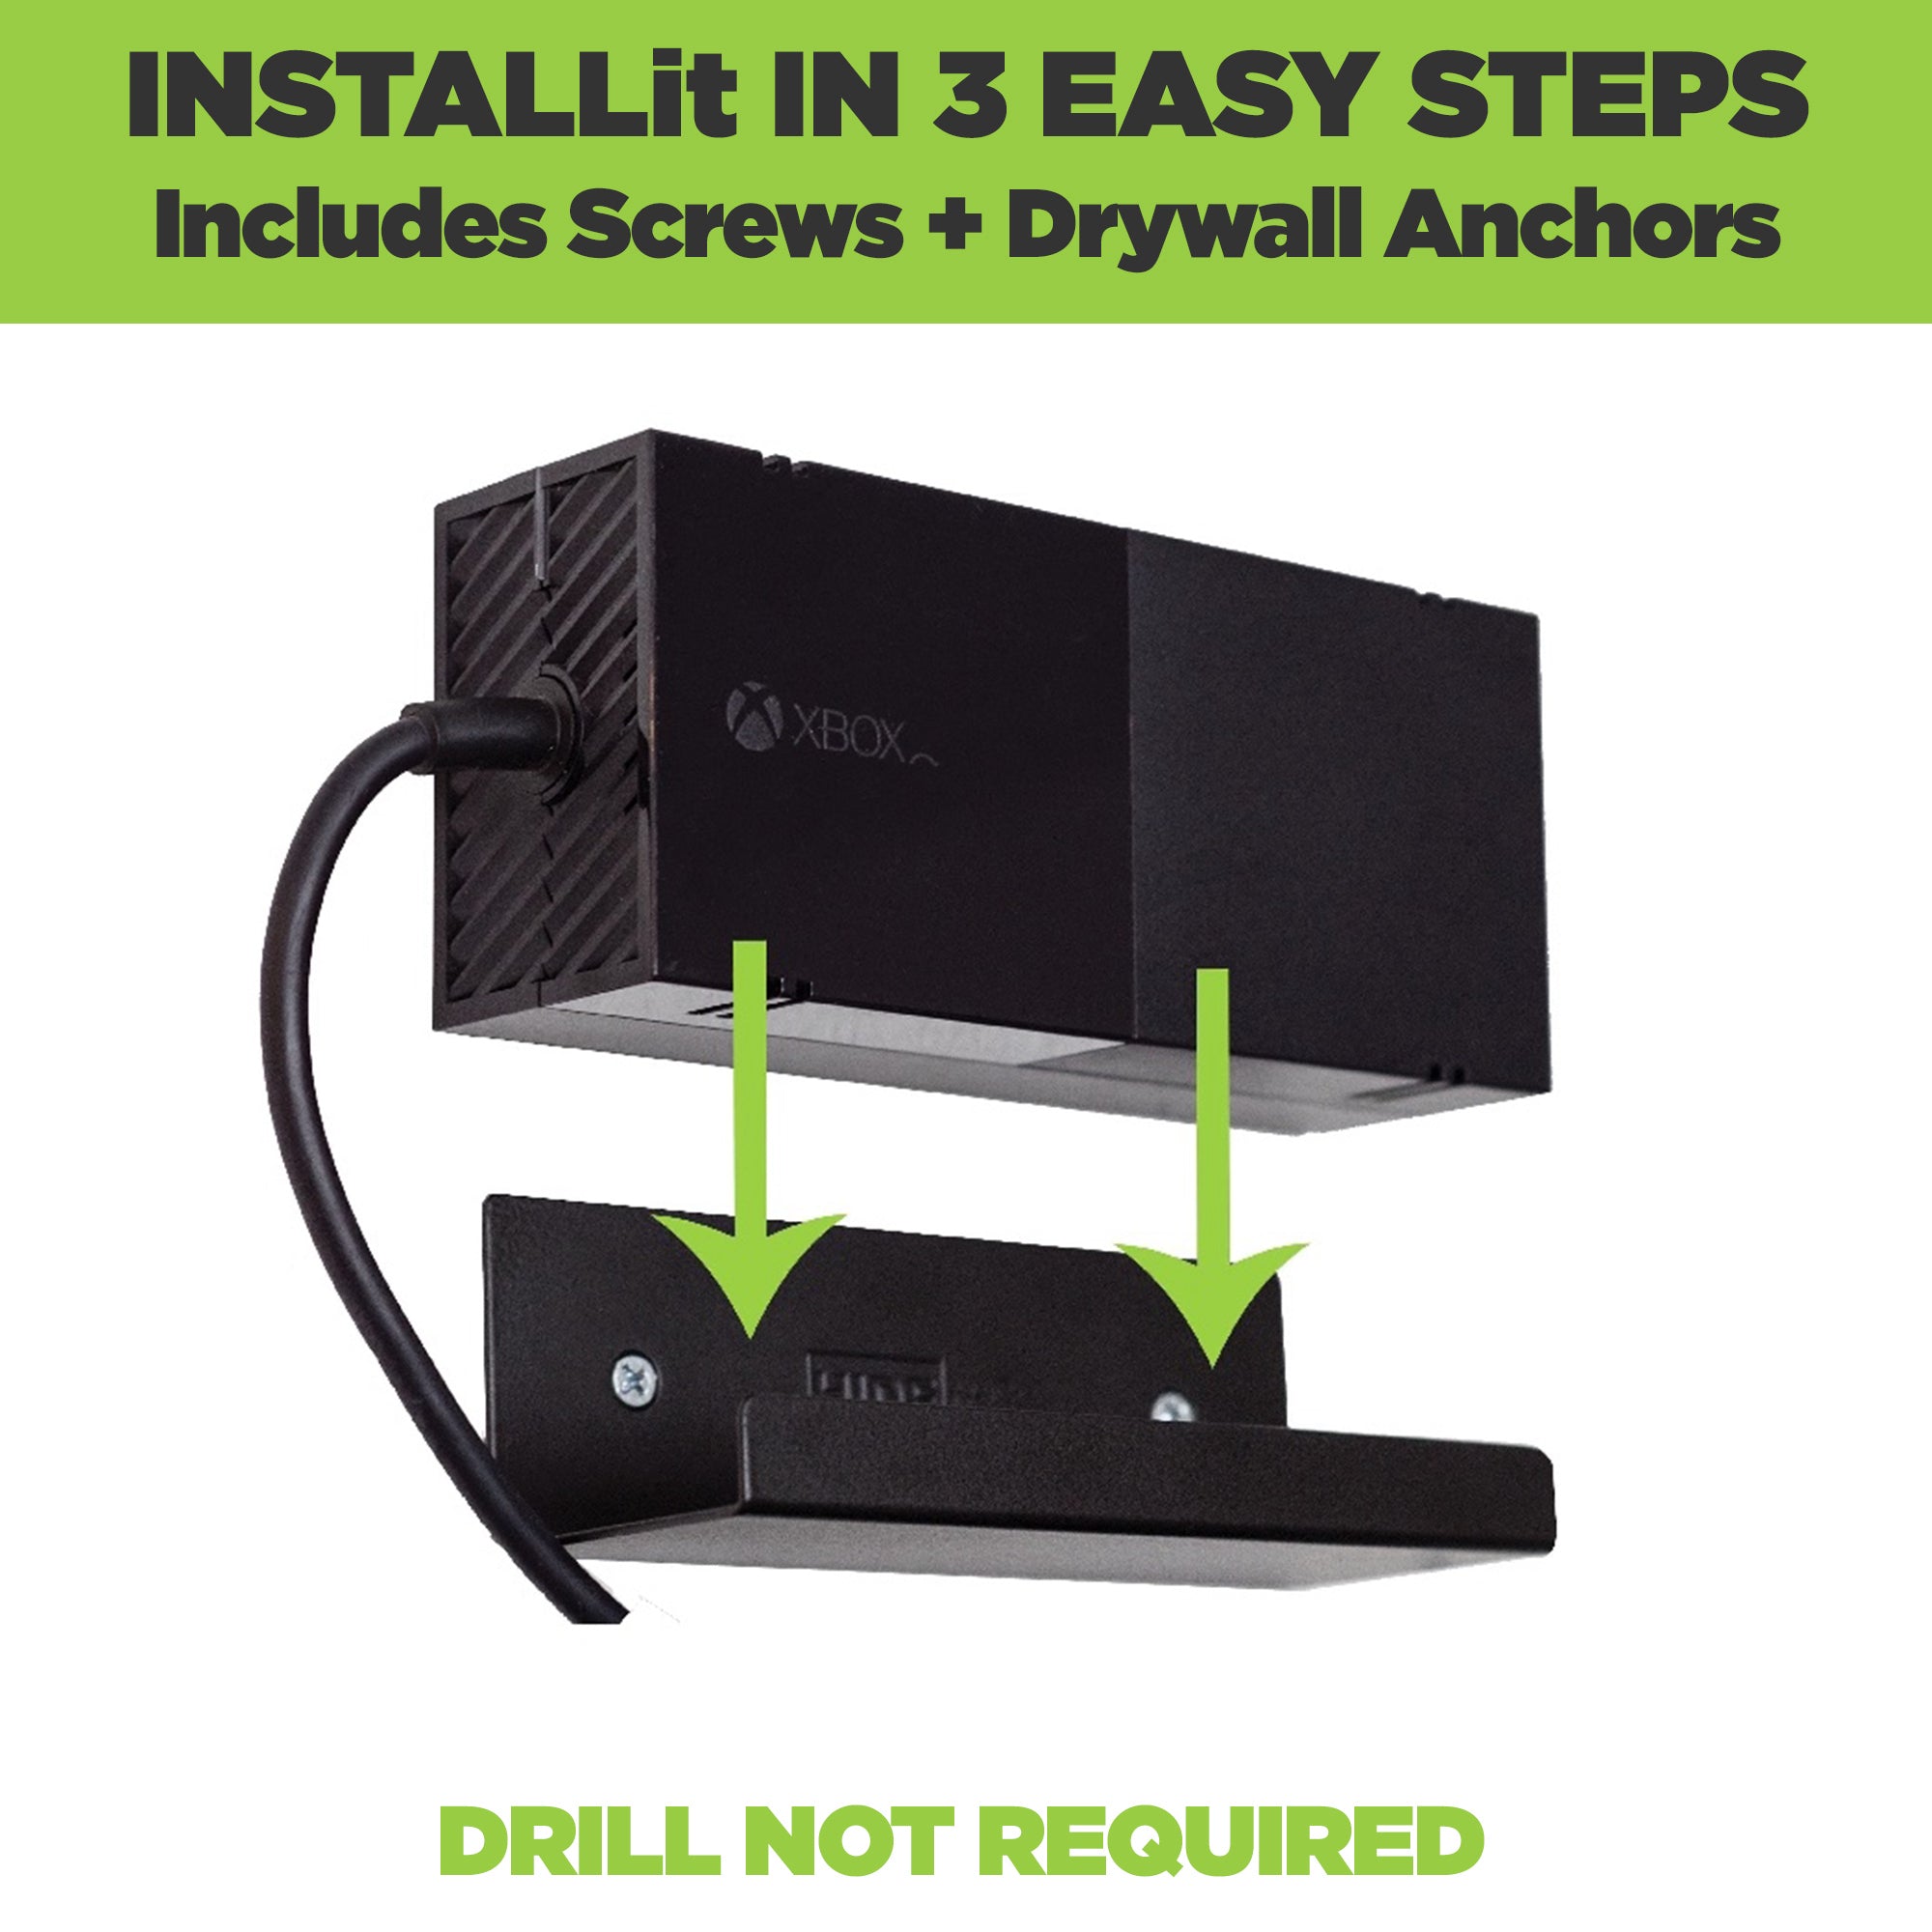 HIDEit Mounts are easy to install in 3 easy steps. All mounting hardware is included.